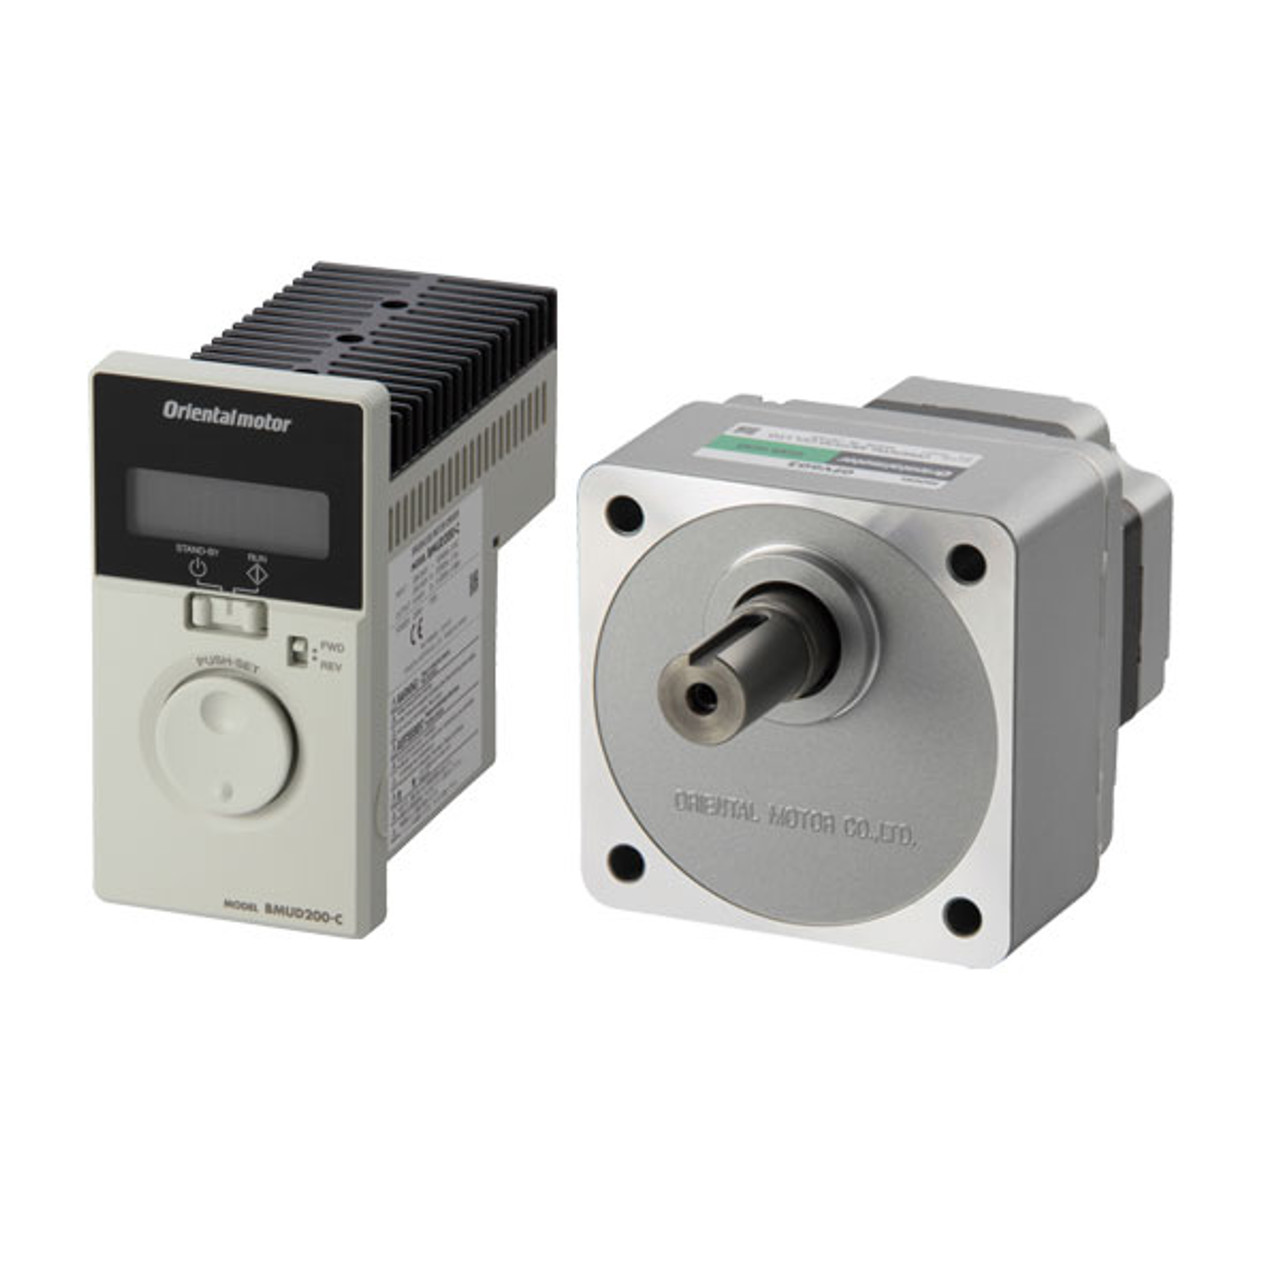 BMU6200SCP-200A - Product Image